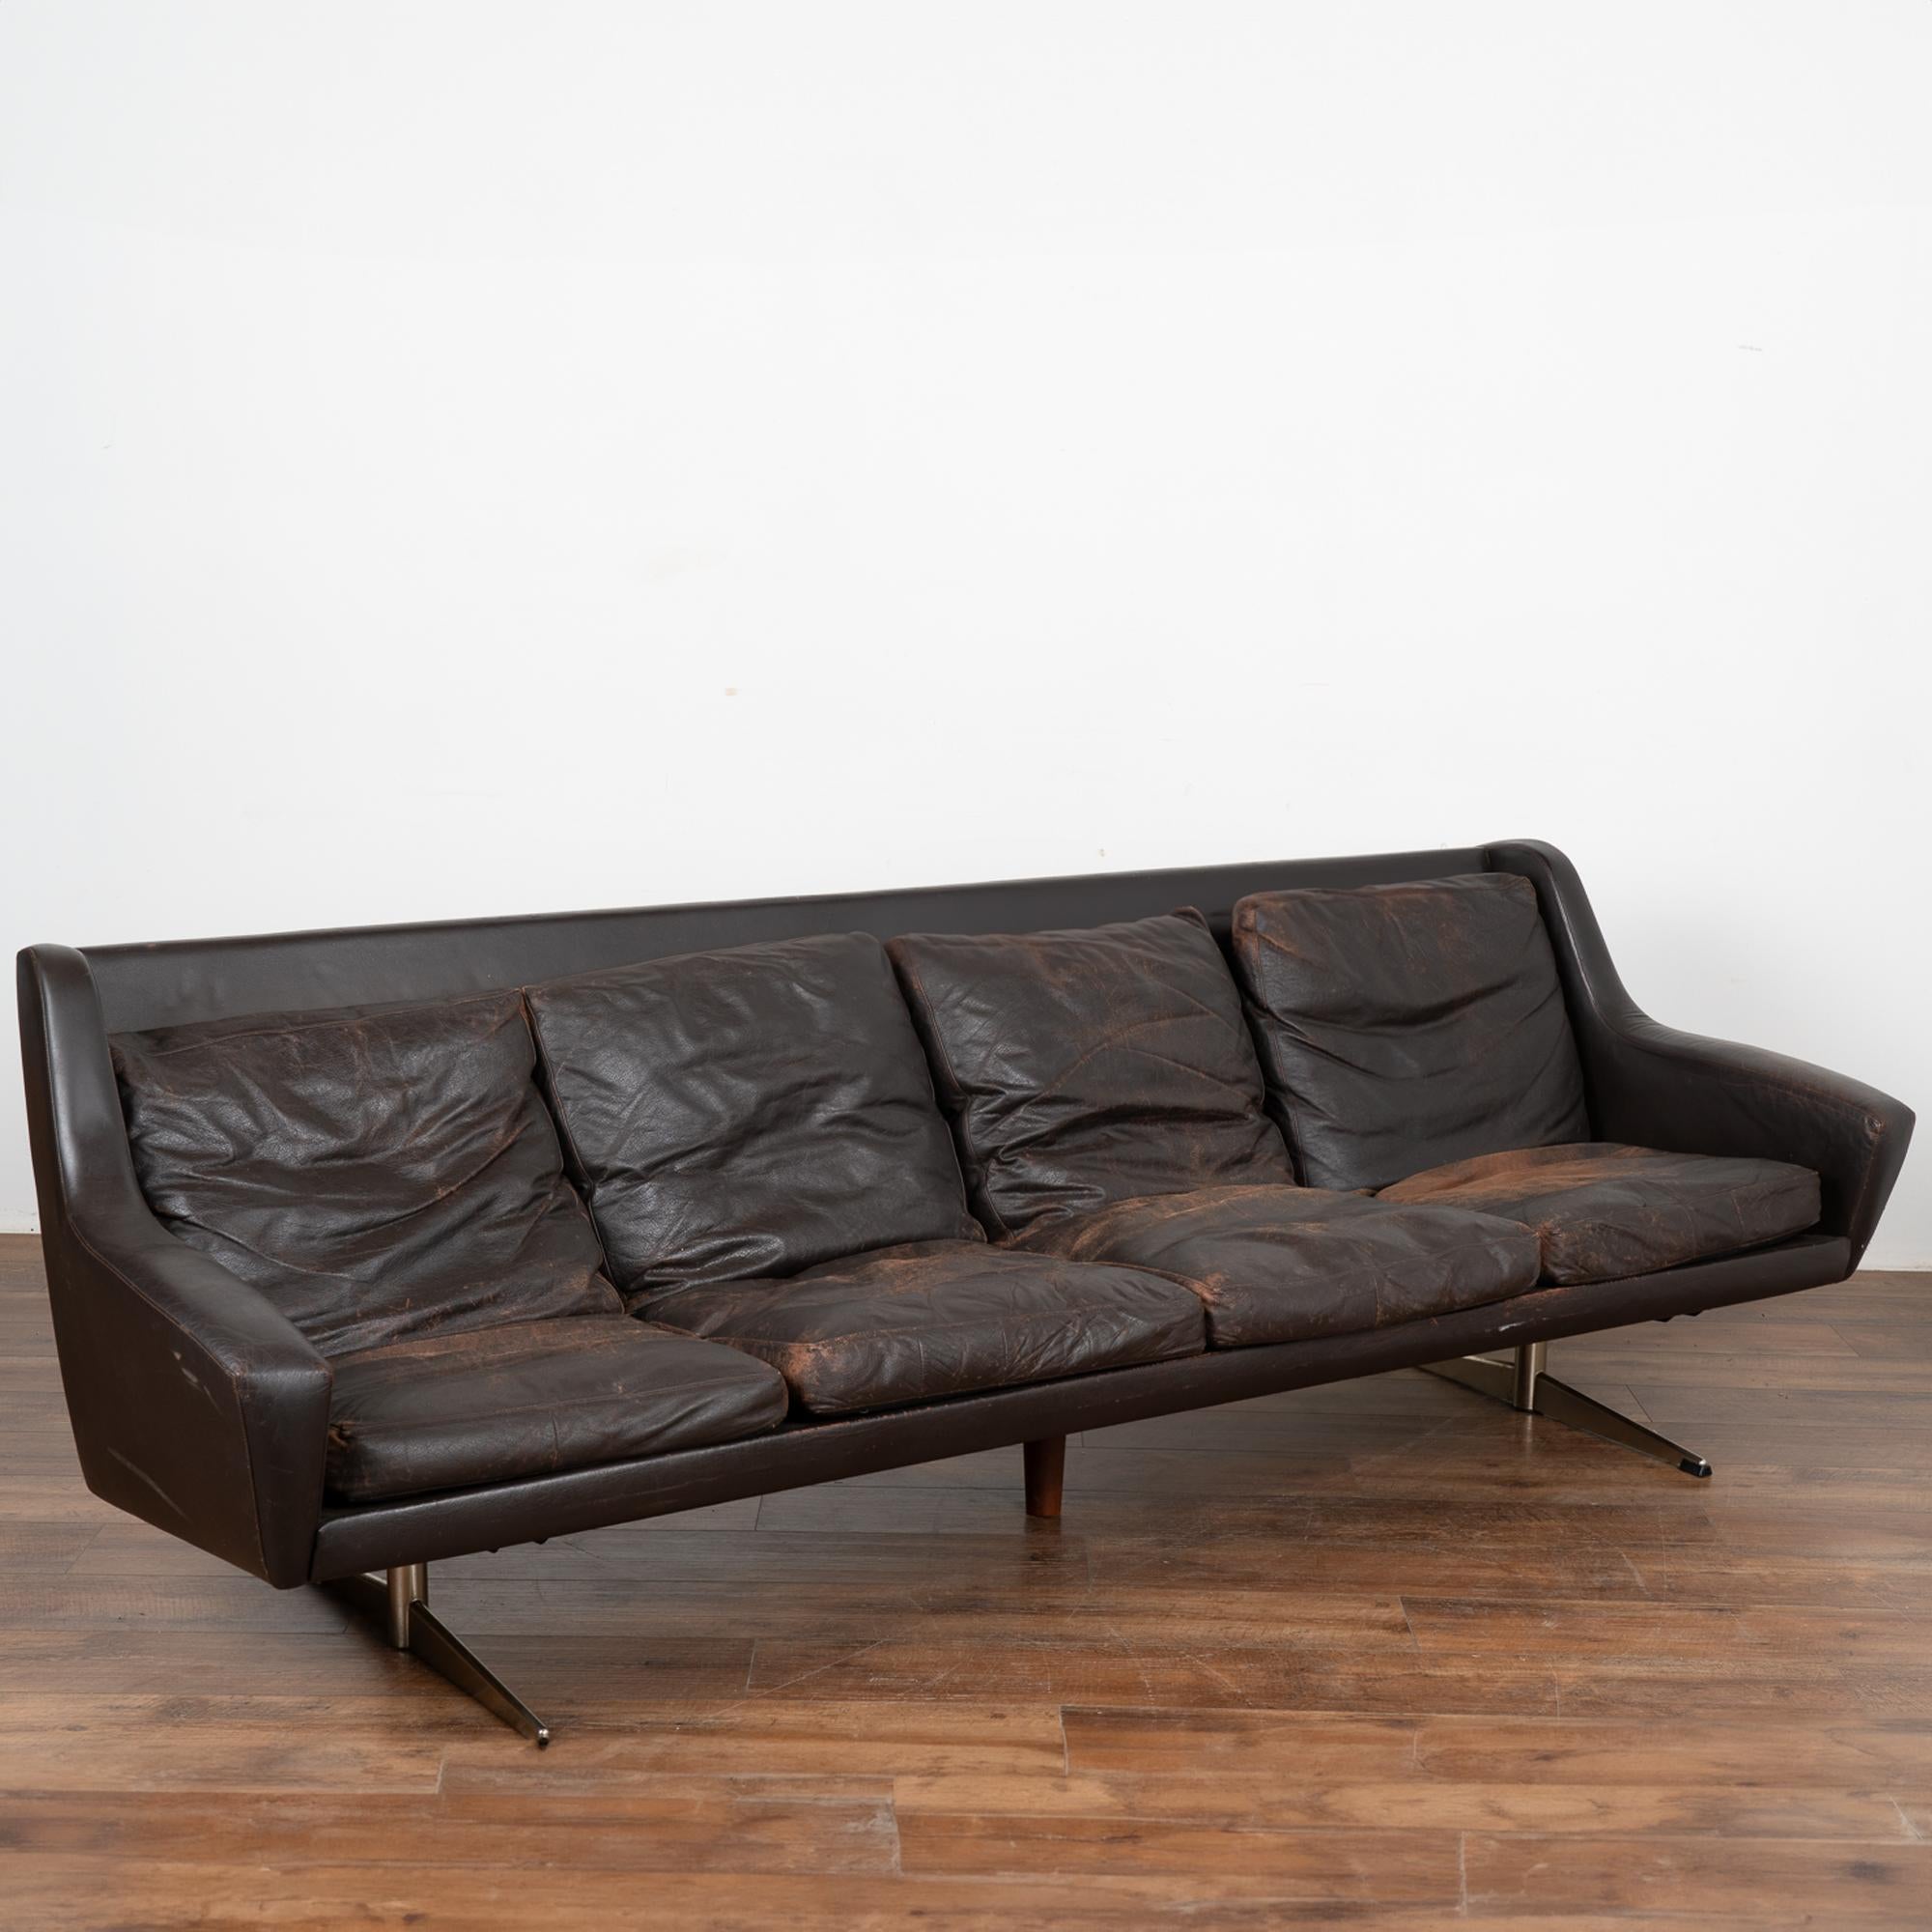 Mid-century modern brown leather four-seat sofa with removable cushions and chrome feet.
The years of use are revealed in the aged patina of the leather, including impressions, scuffs/scratches, discoloration, abrasions, sagging, etc.  which all add